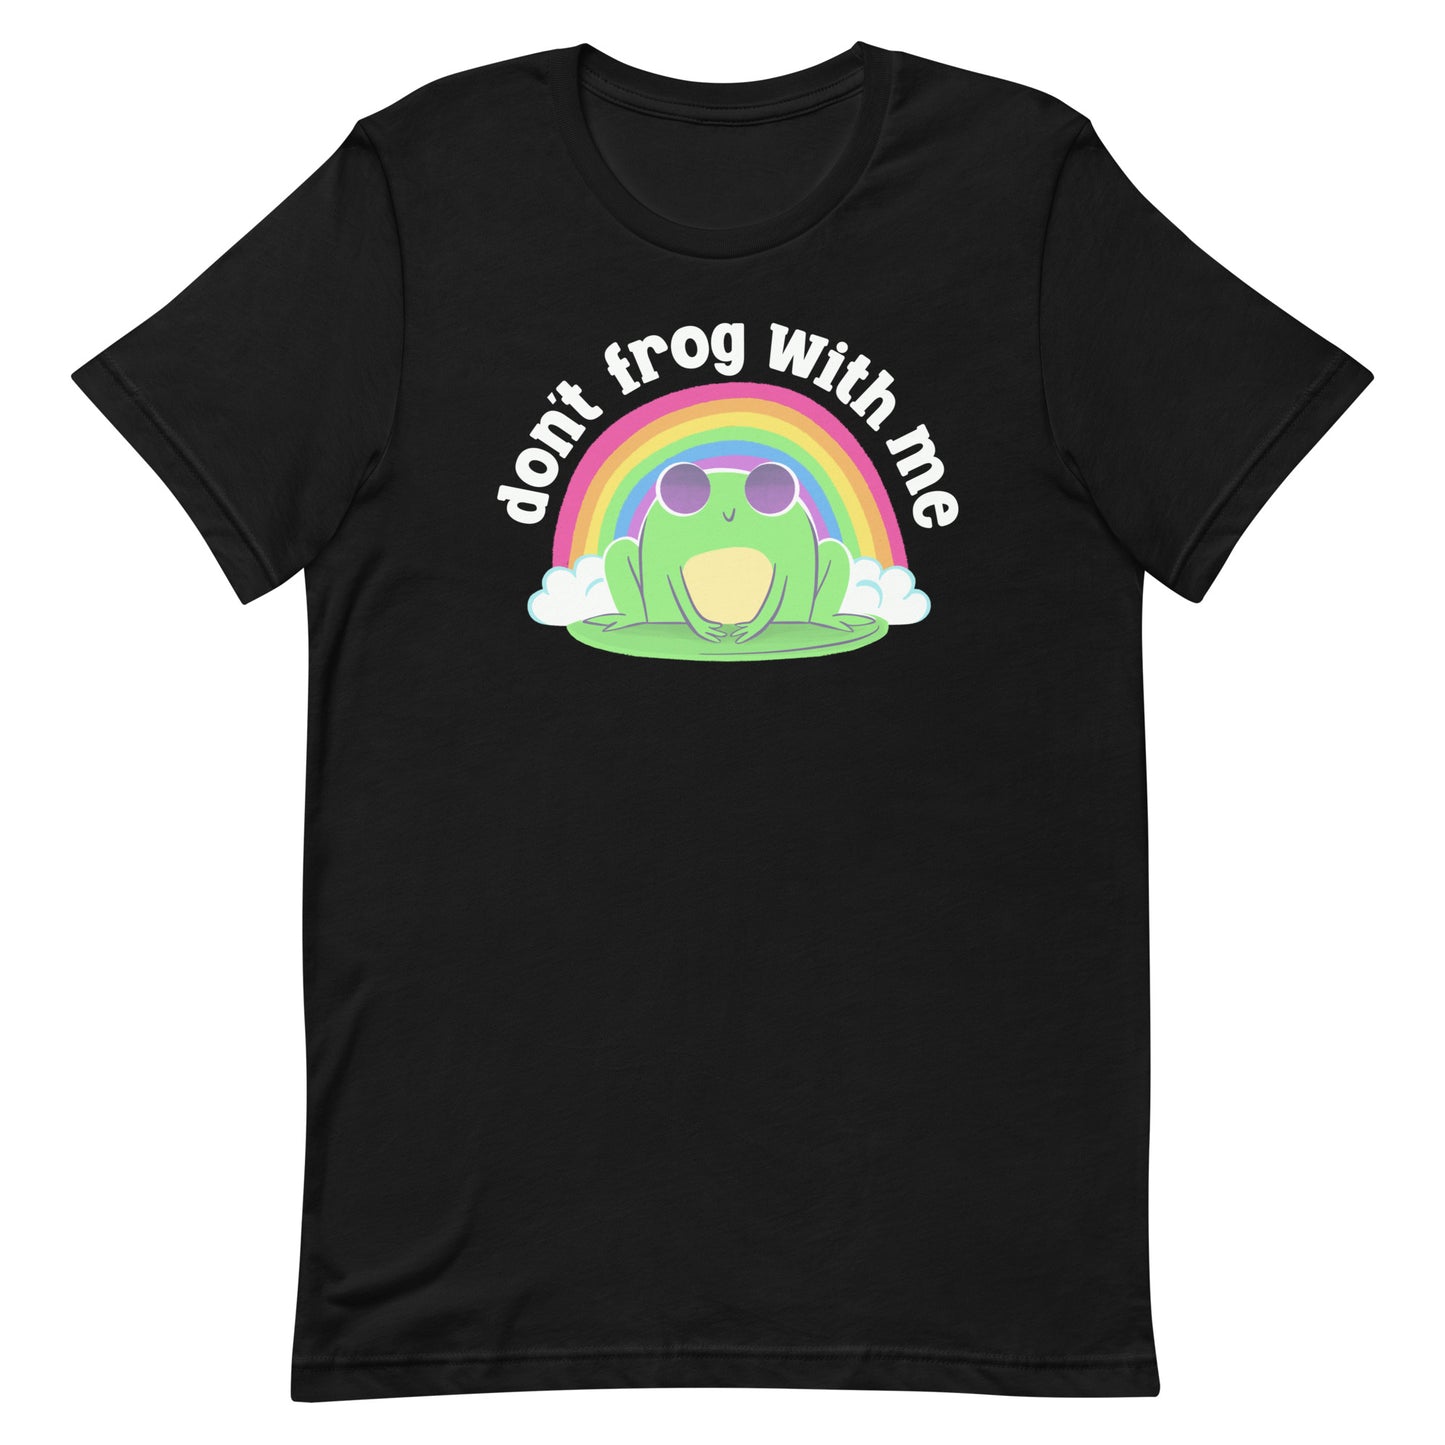 Don't Frog With Me Funny T-shirt